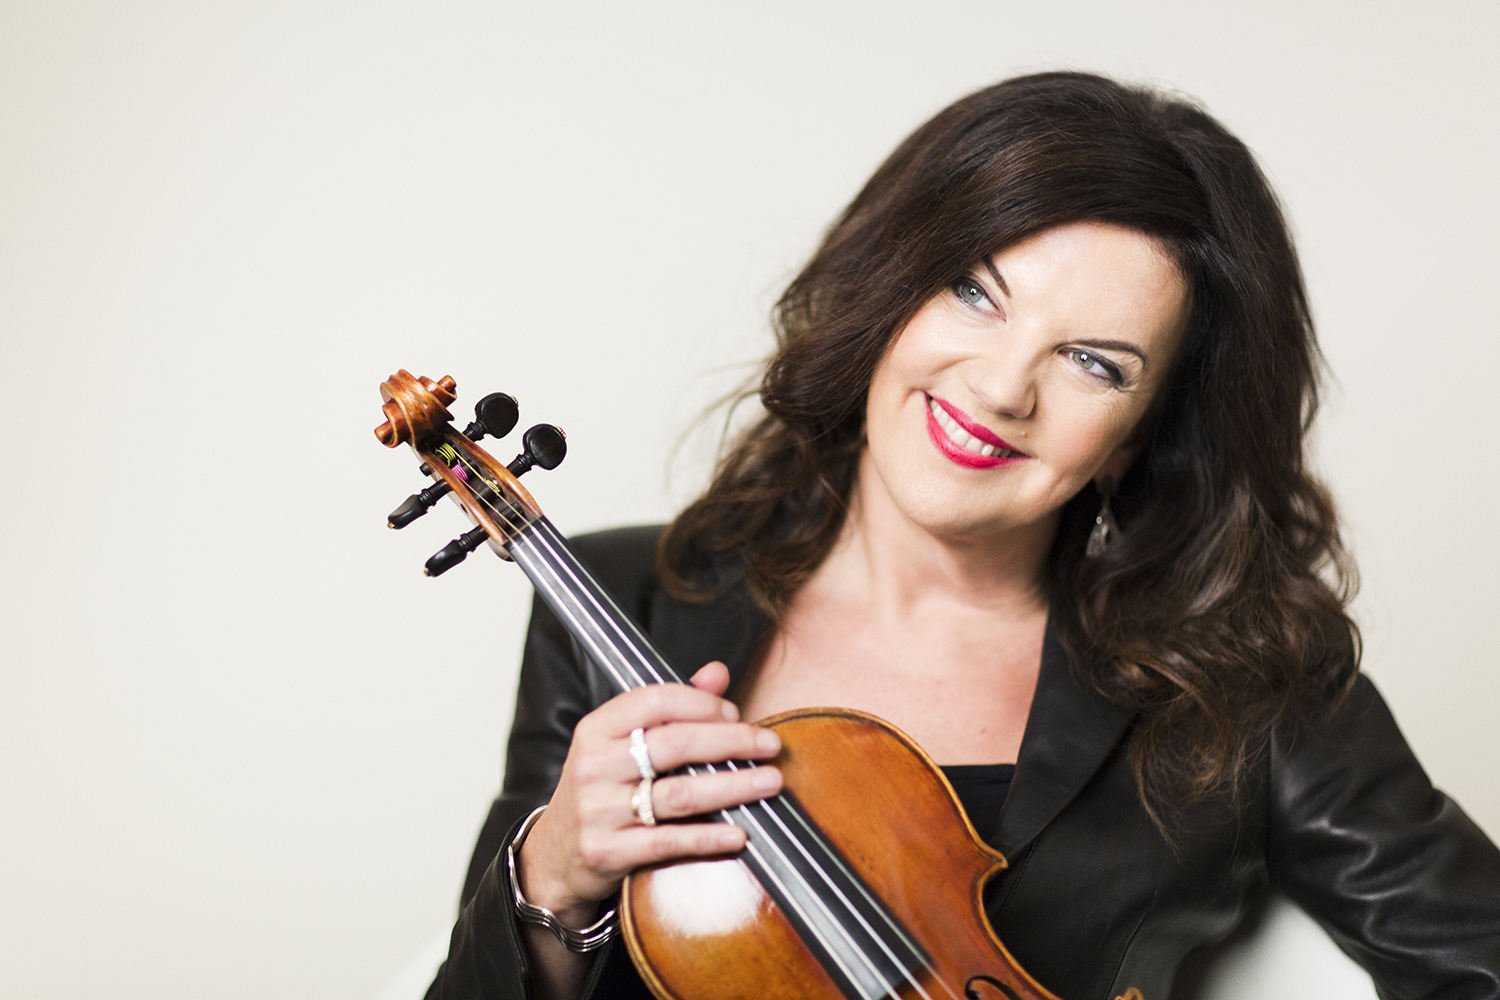 A photograph of Tasmin Little wearing black, holding her violin and smiling, looking off to the side